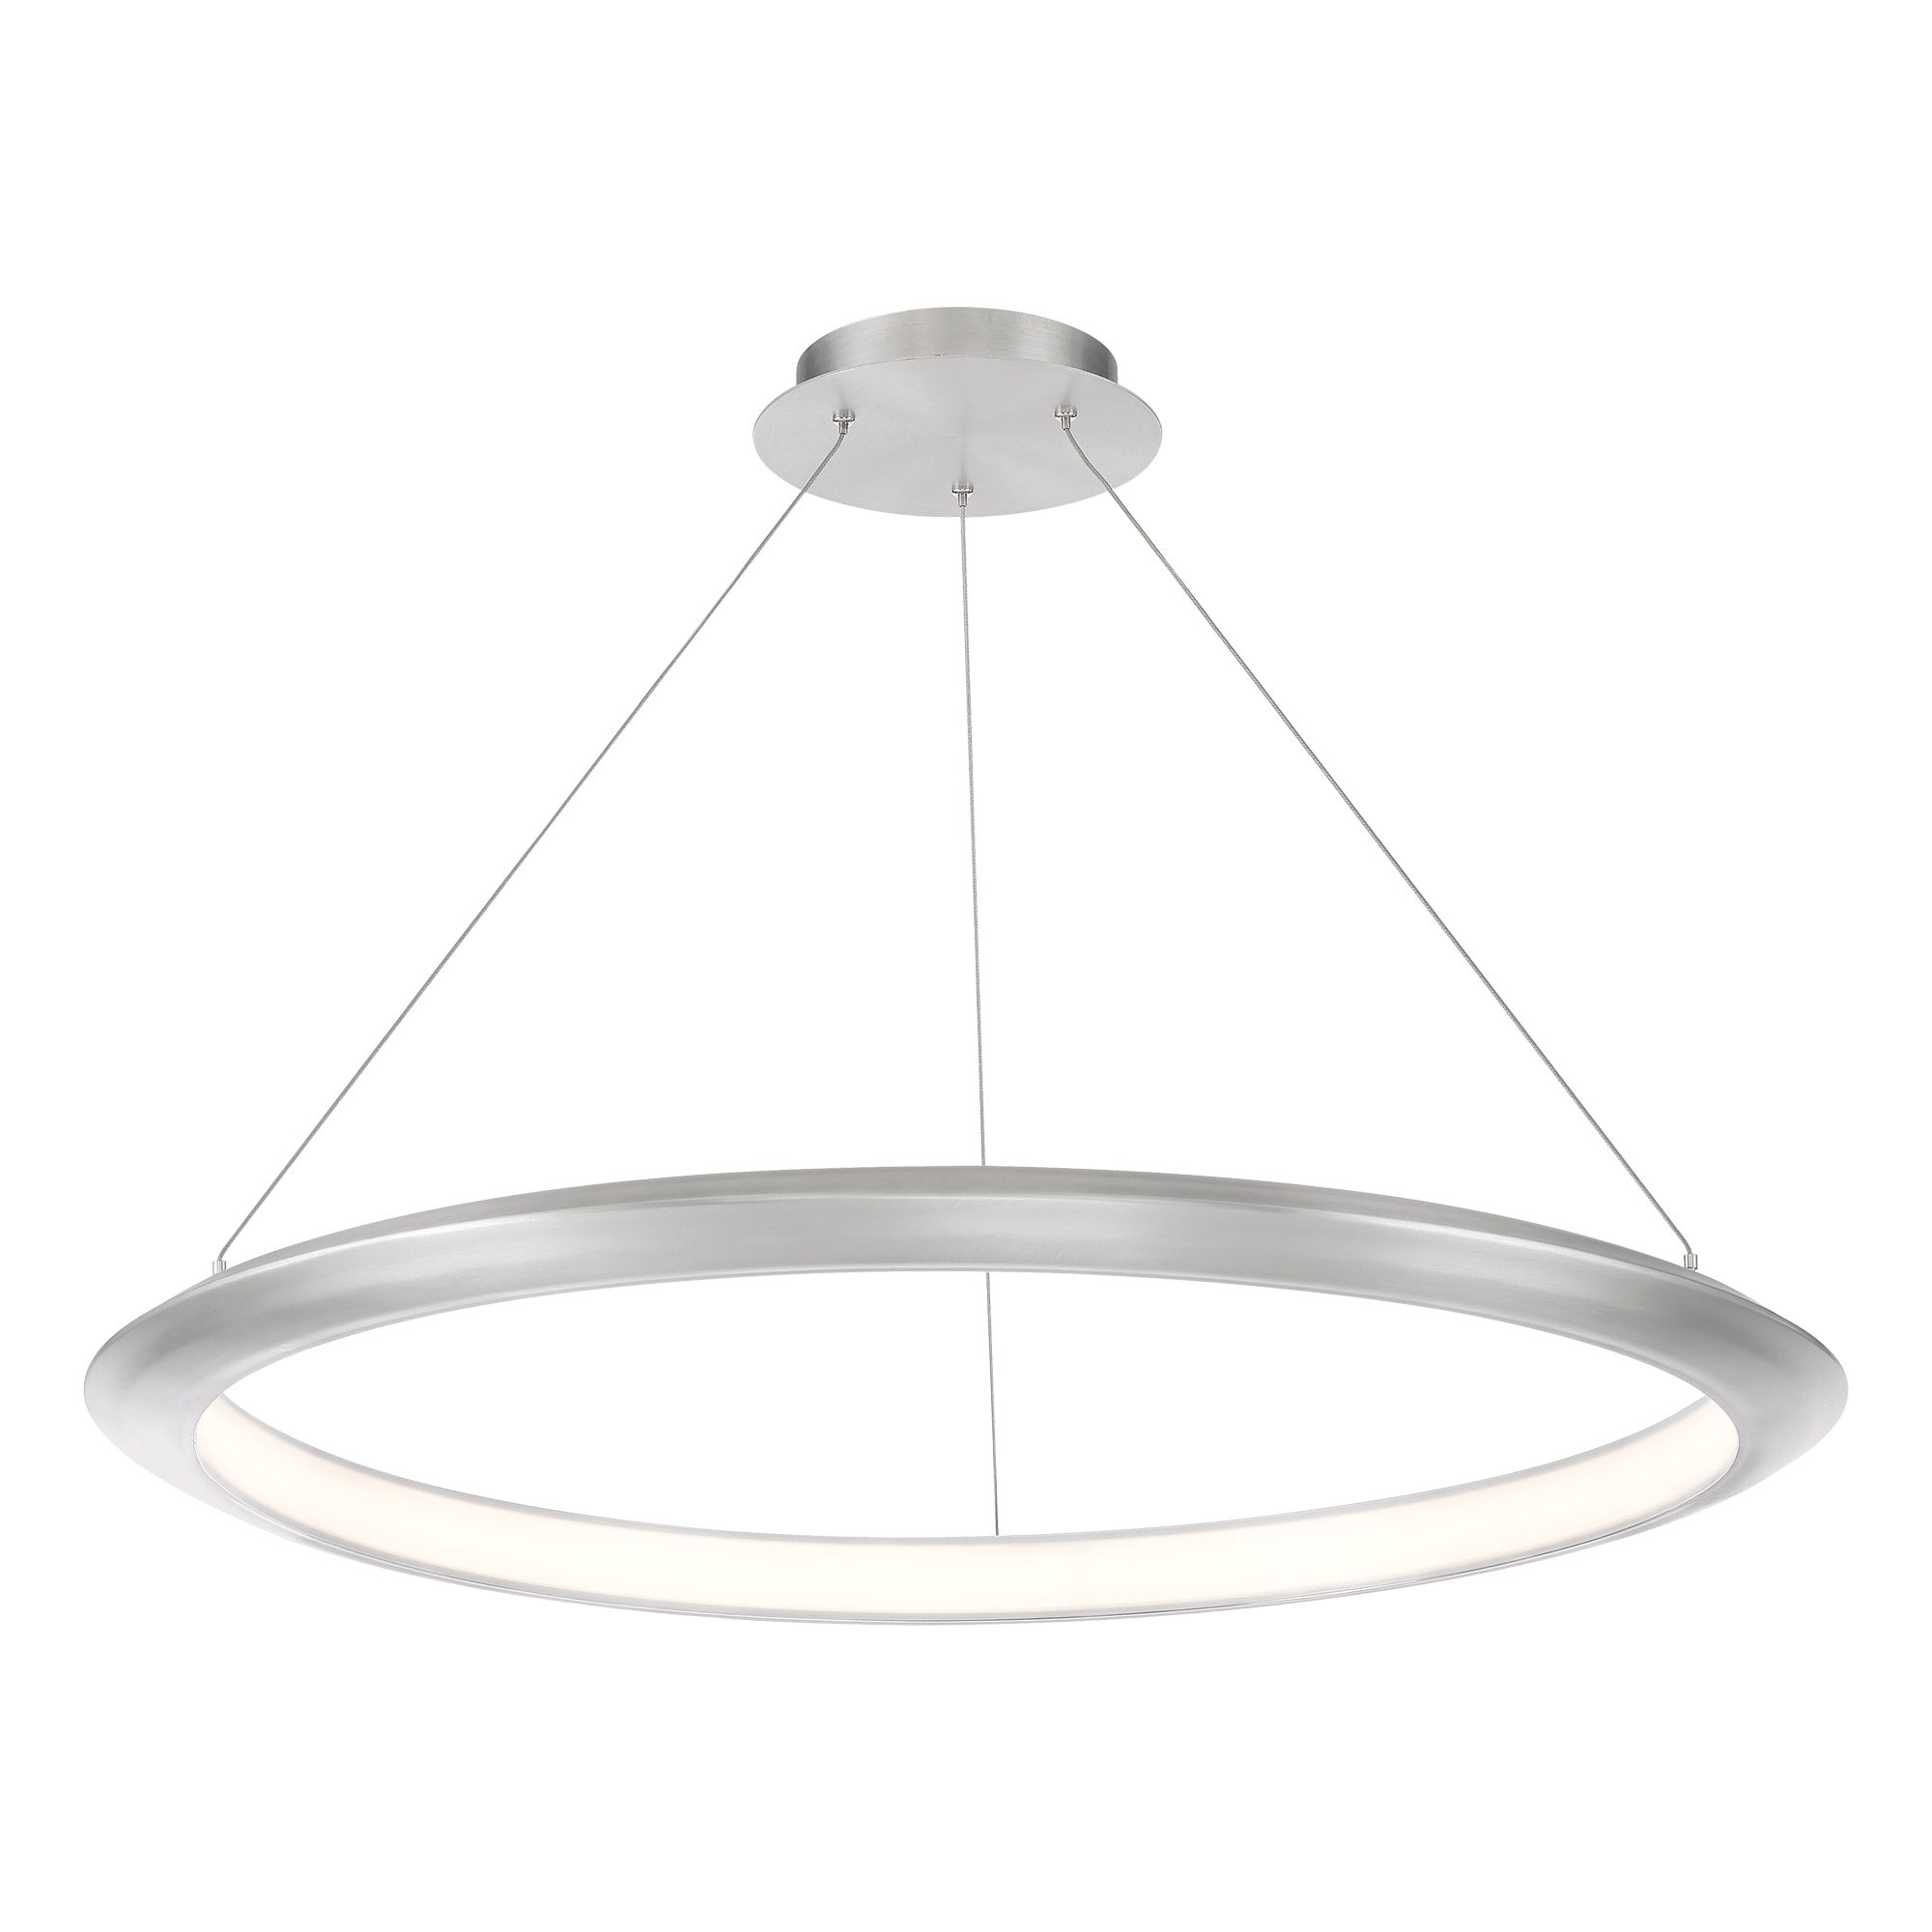 THE RING Chandelier Aluminum INTEGRATED LED - PD-55036-30-AL | MODERN FORMS